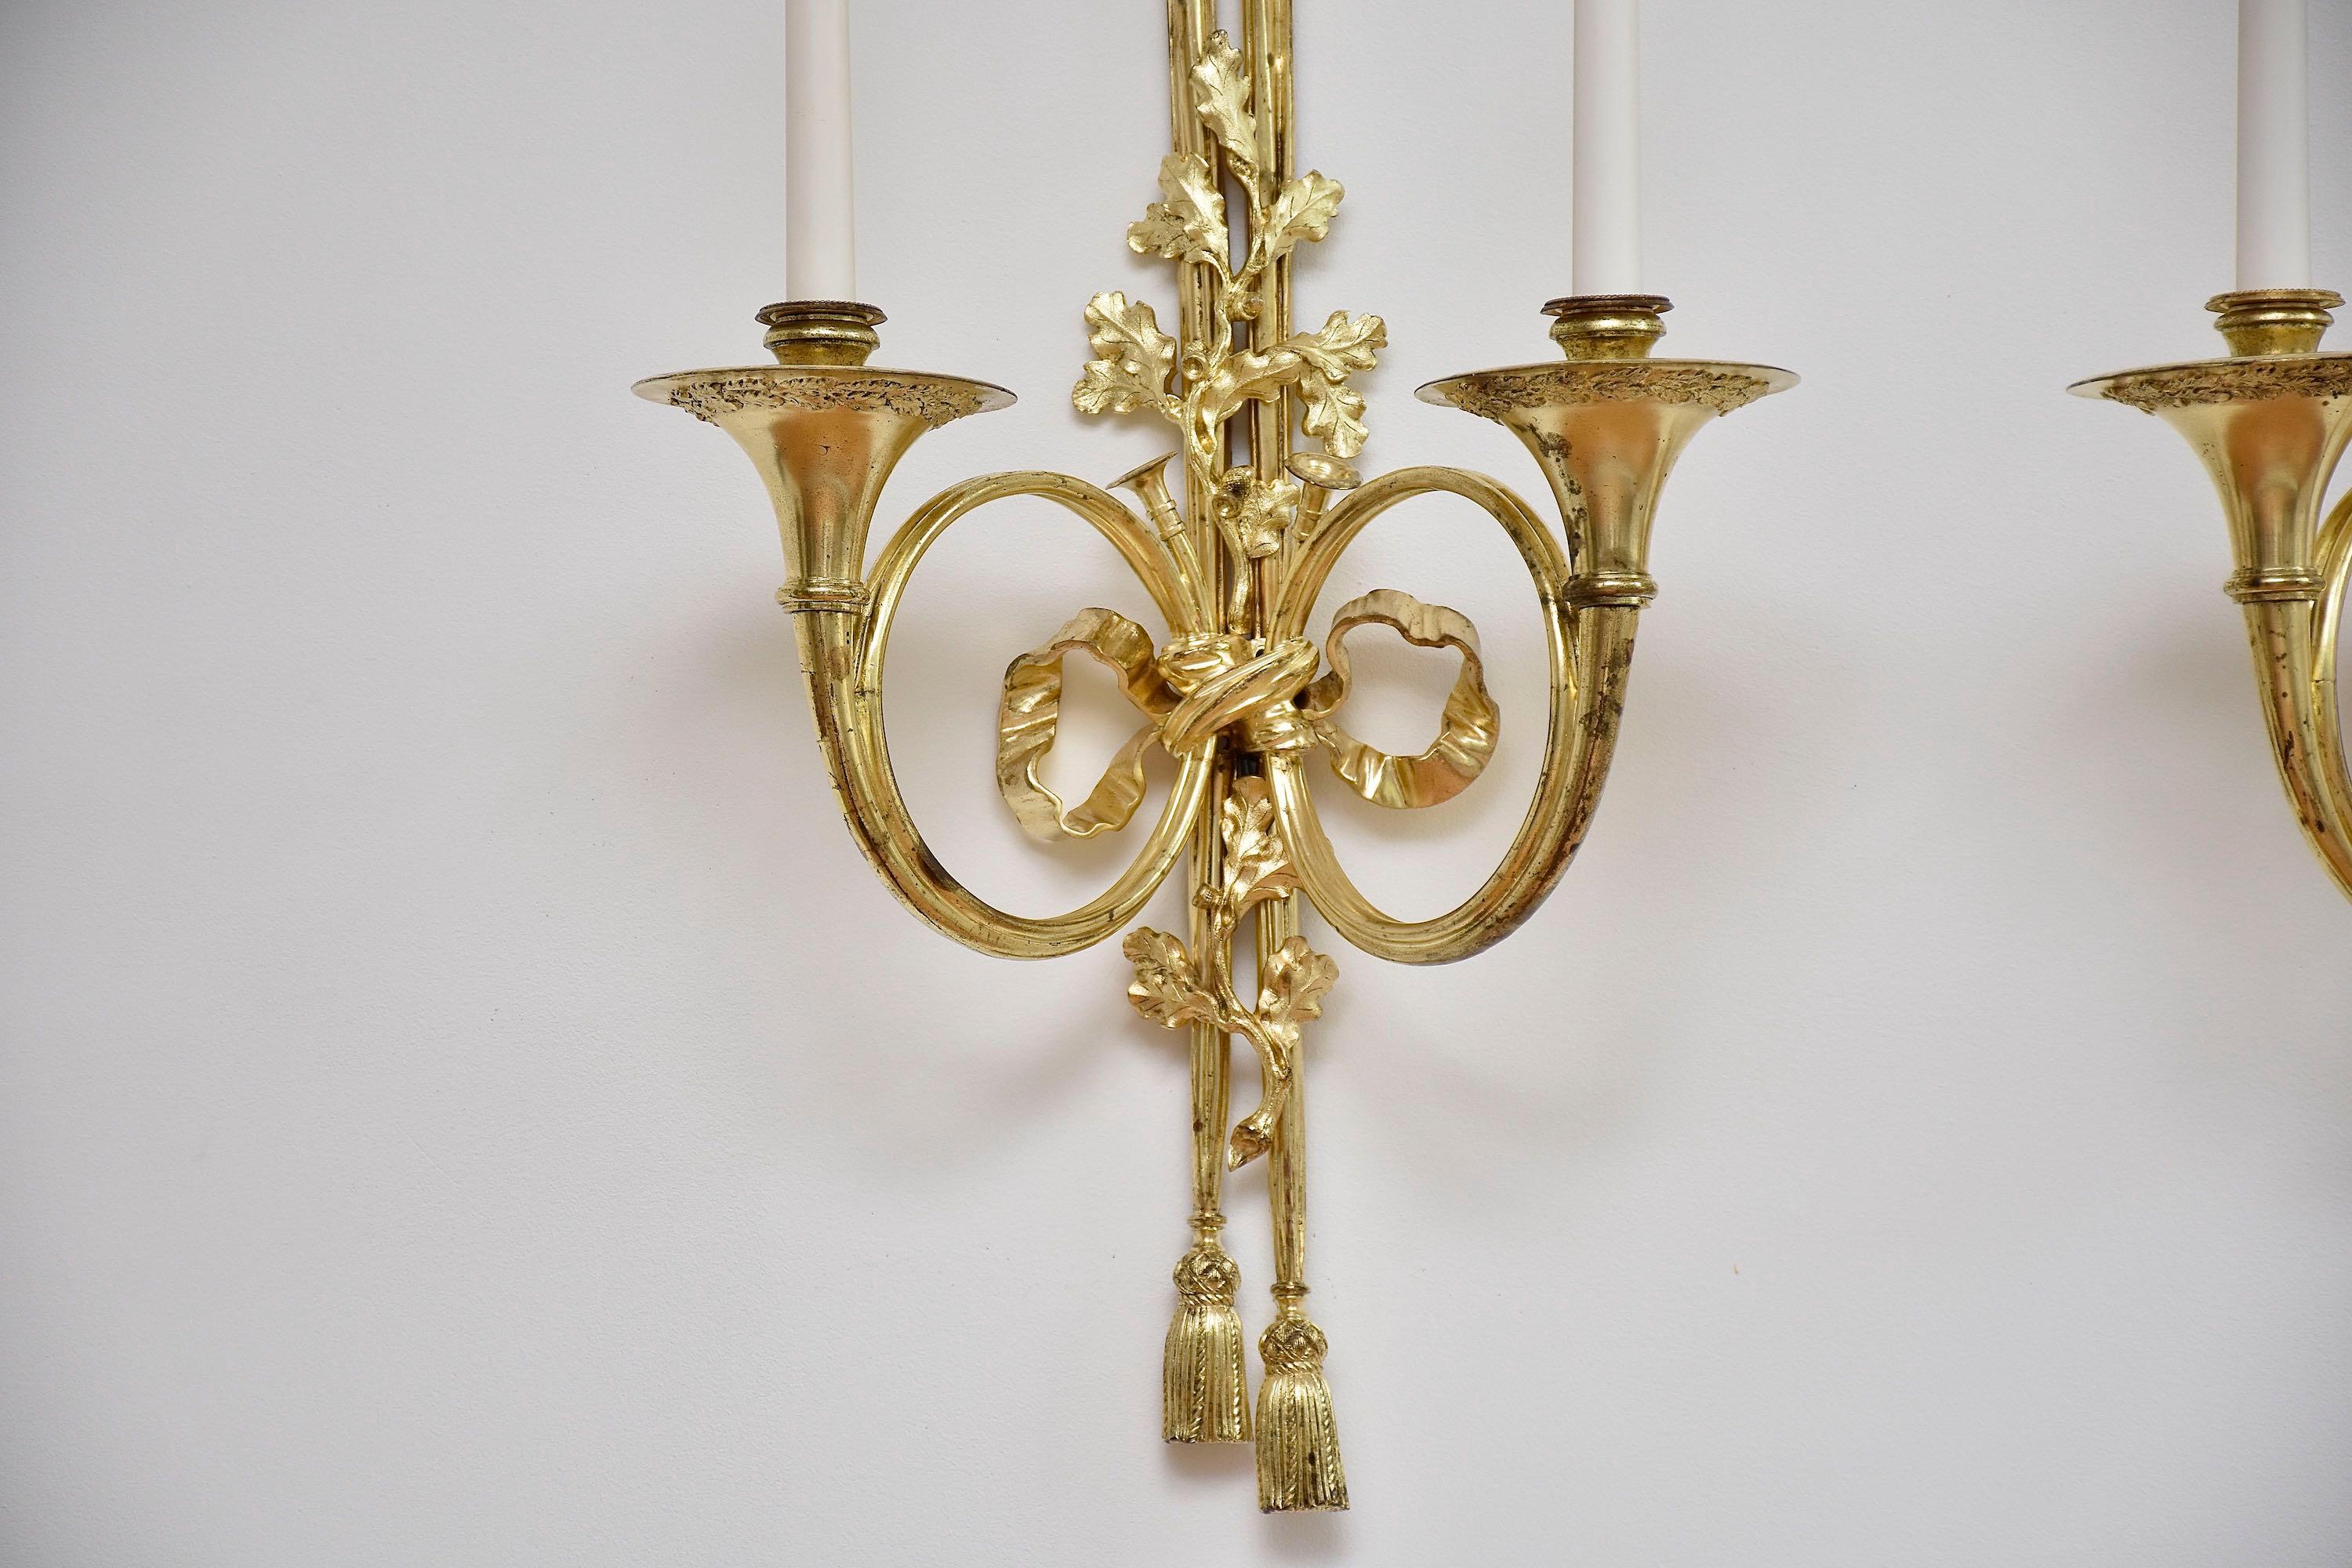 A beautiful and very impressive large pair of French two-light wall appliques, Louis XVI style.
Each with backplate in the form of tasselled drapery swags mounted with entwined oak branches, a ribbon-tied bow-knot and two horn and centrally issuing